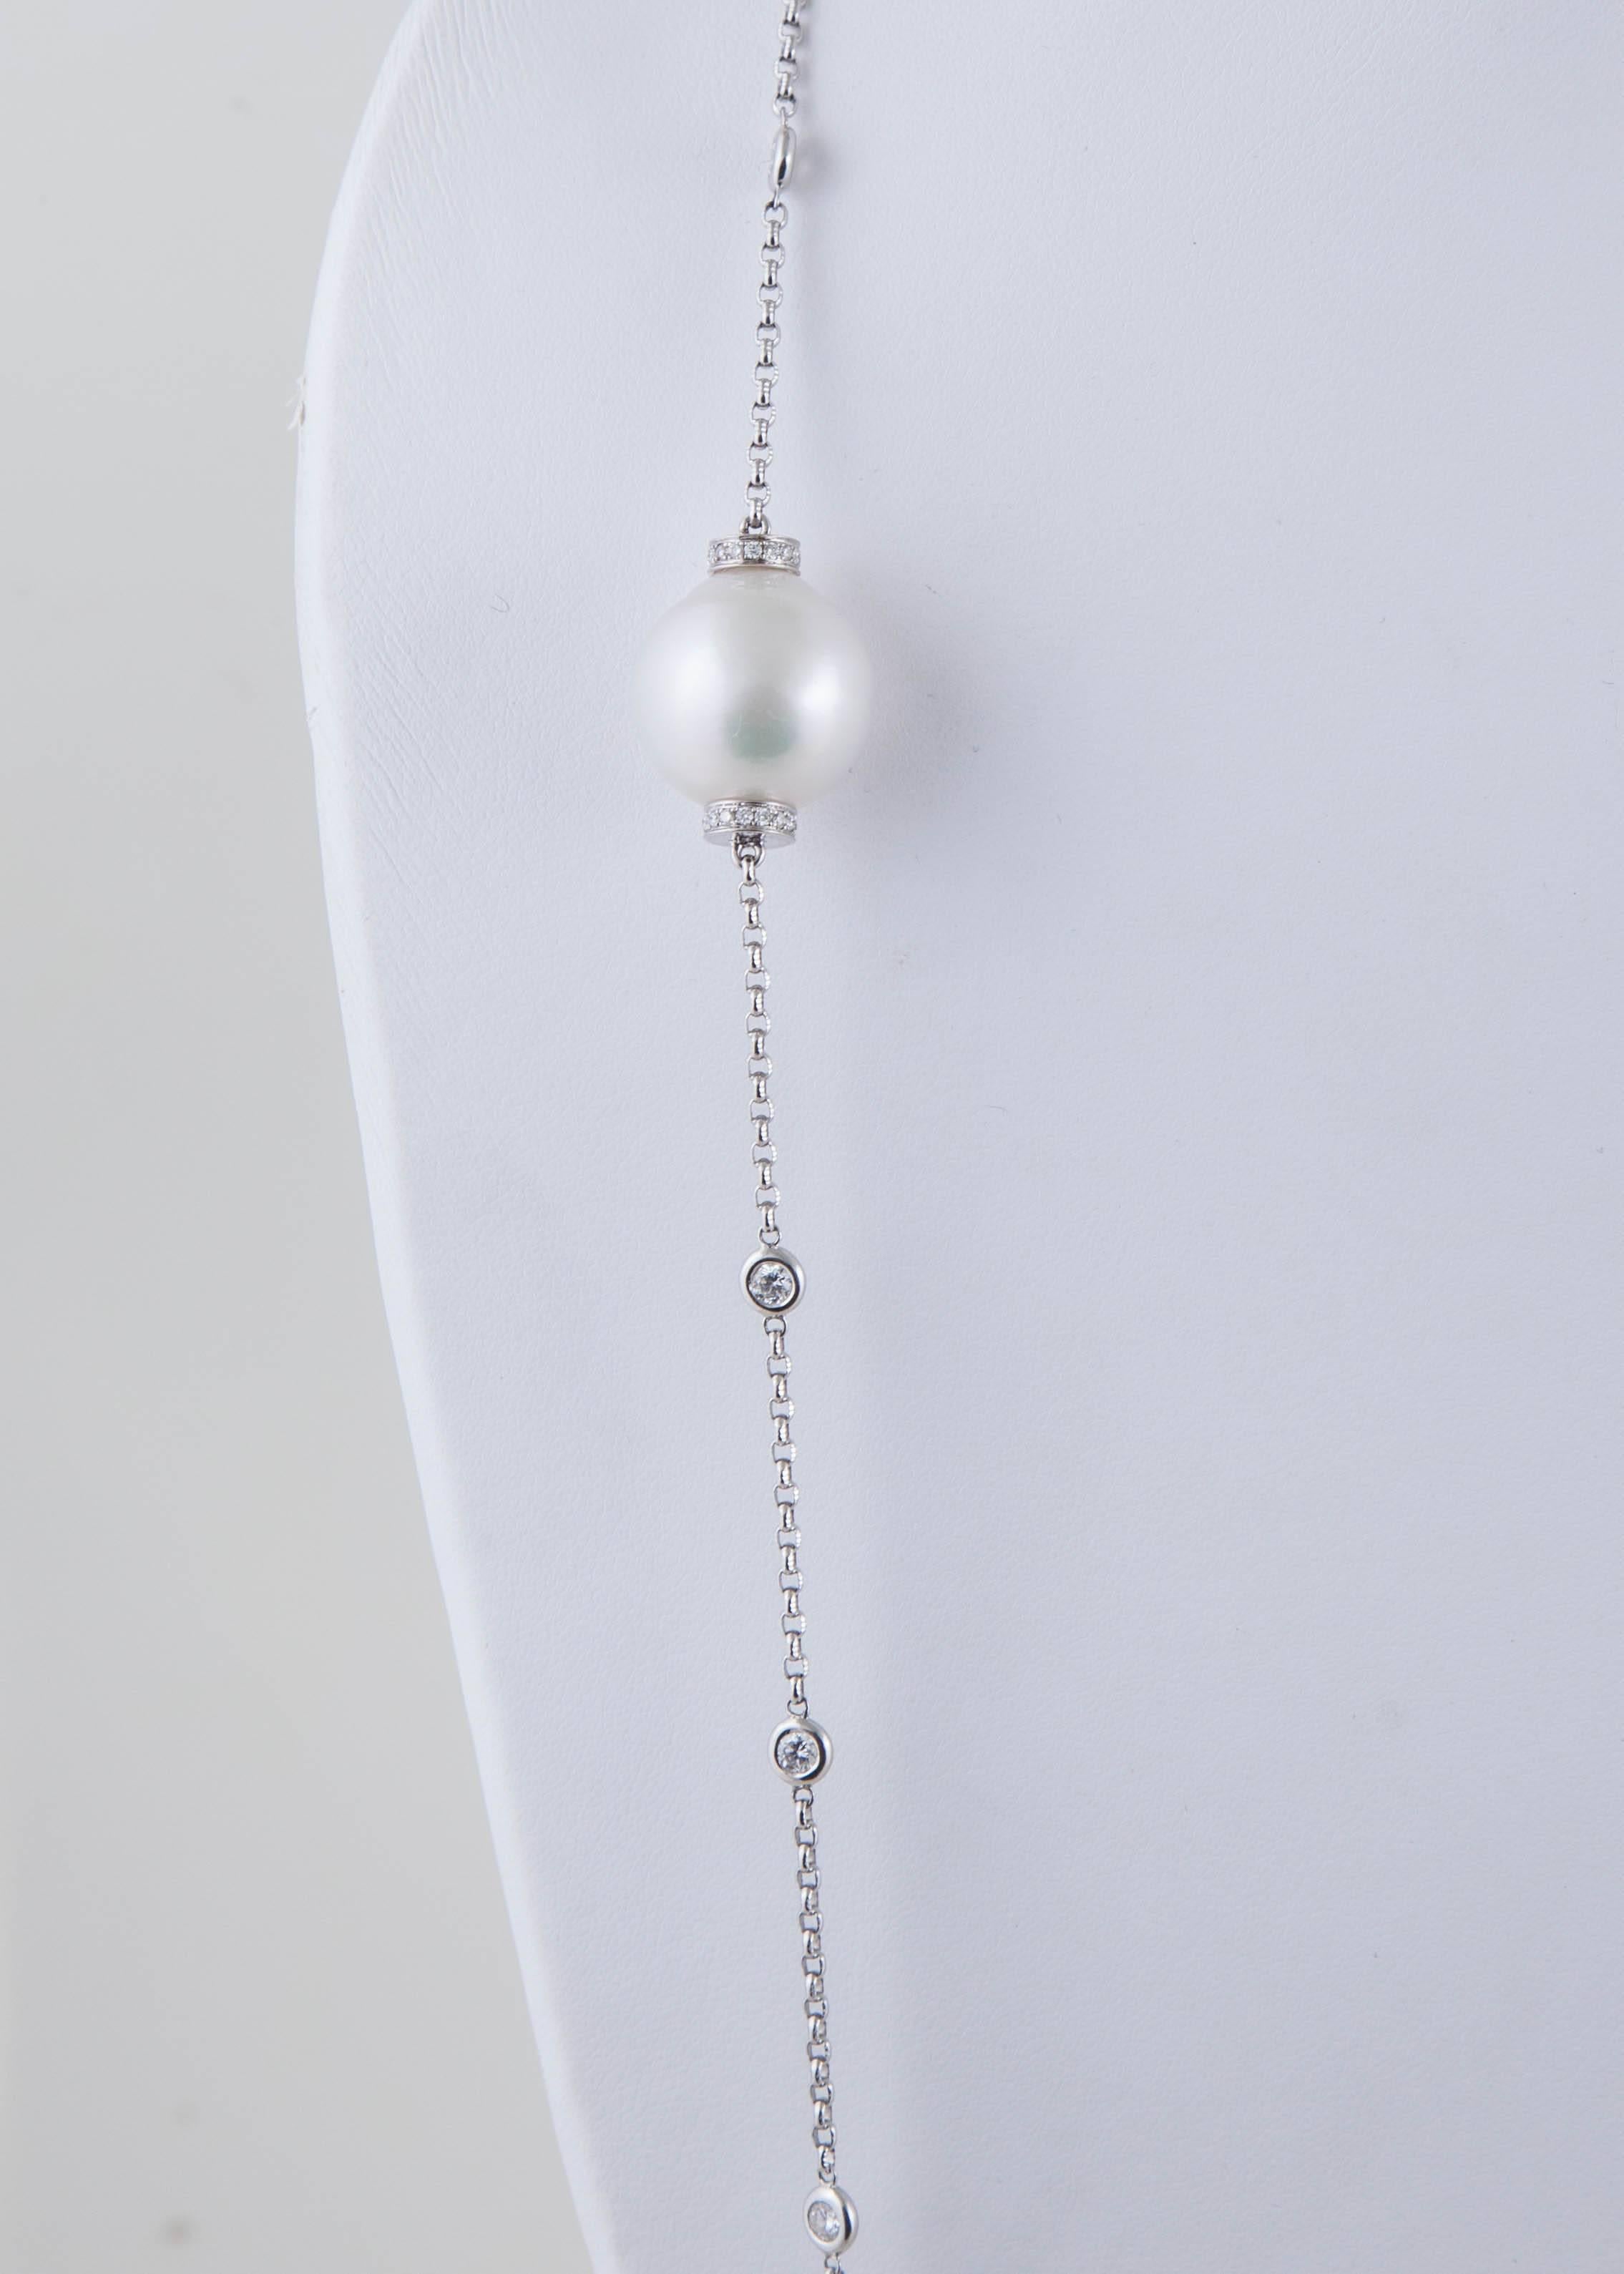 This White South Sea Pearl and Diamond Necklace is perfect for layering or wearing solo. Consisting of 5 natural color 17x18mm White South Sea pearls and 1.53ct of bezel diamonds. 

This necklace is 41